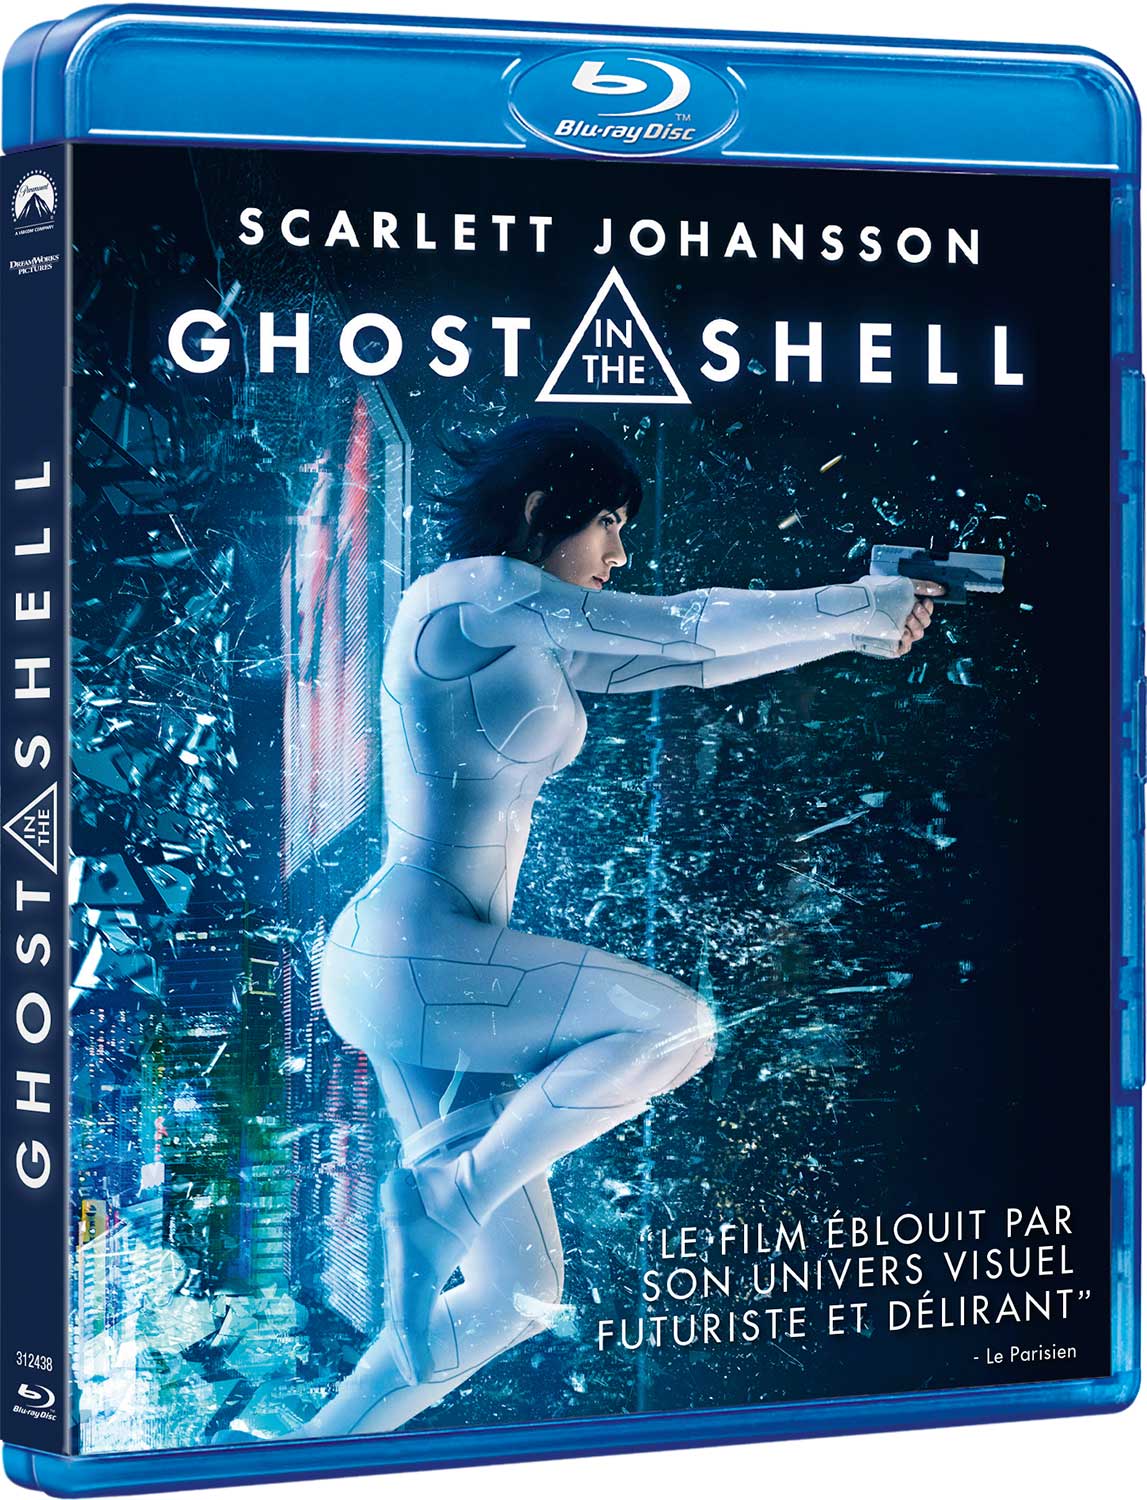 GHOST IN THE SHELL BRD